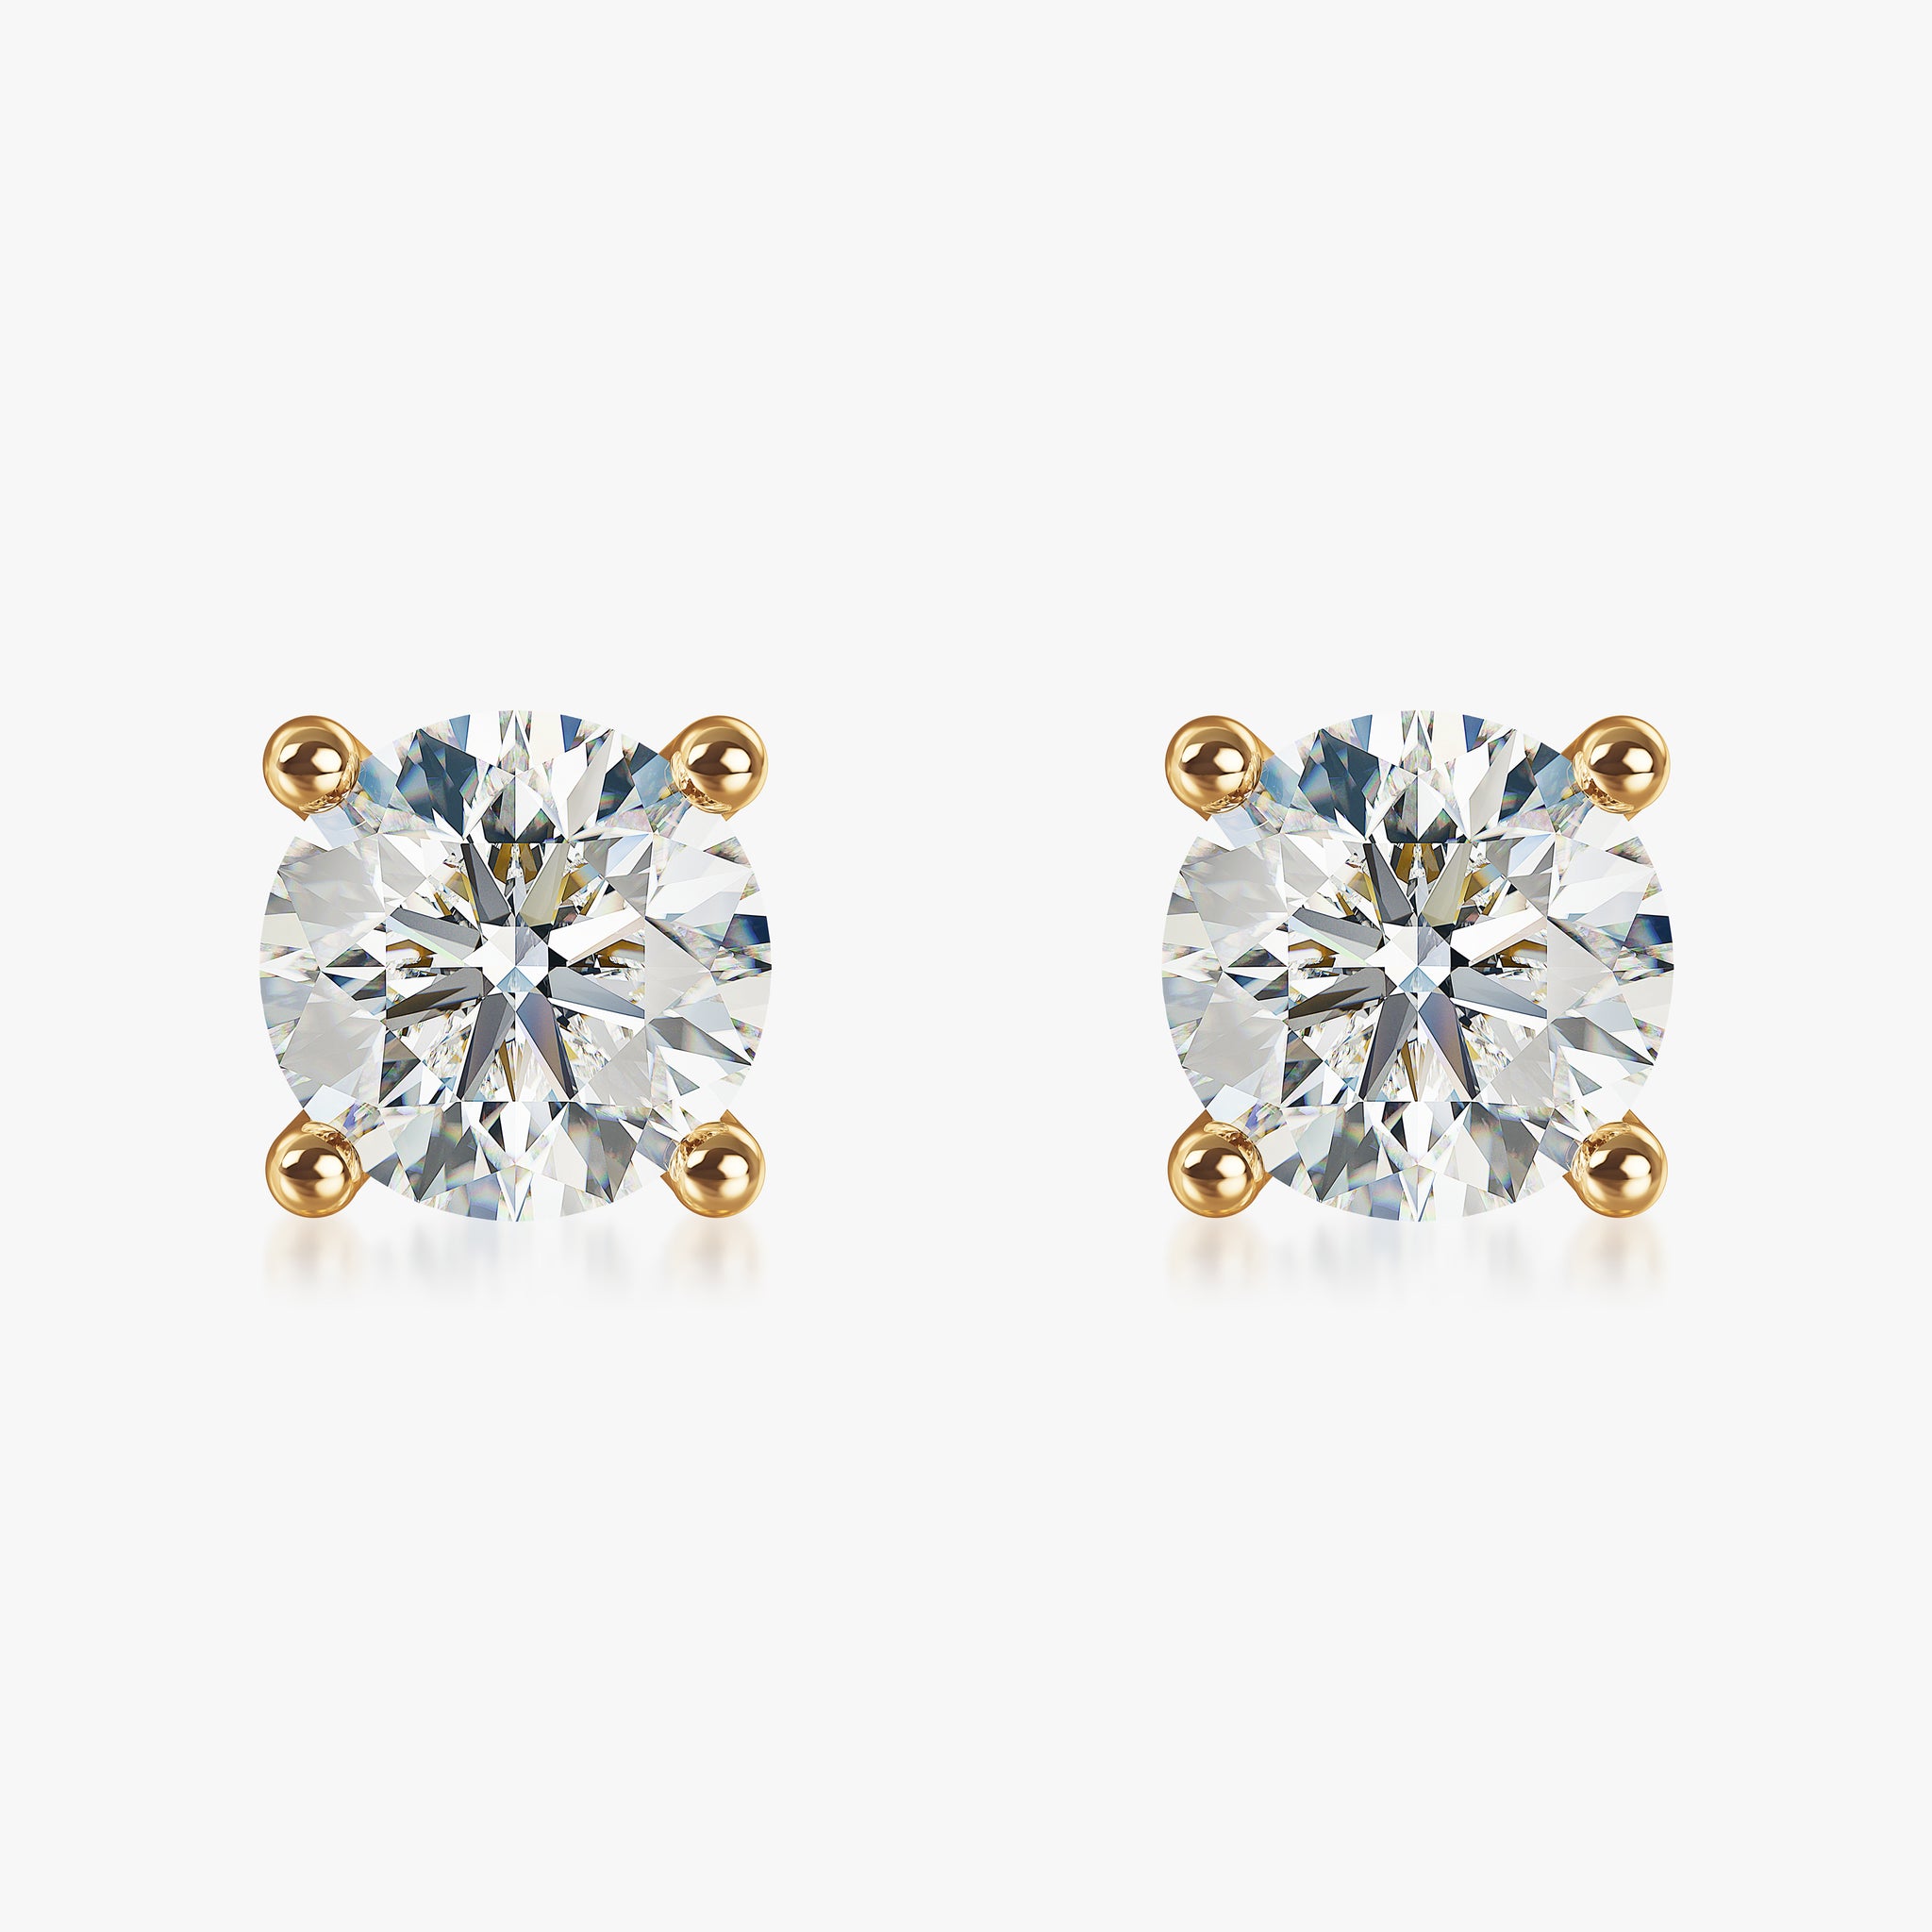 J'EVAR 18KT Yellow Gold ALTR Lab Grown Diamond Stud Earrings with Guardian Backs Front View